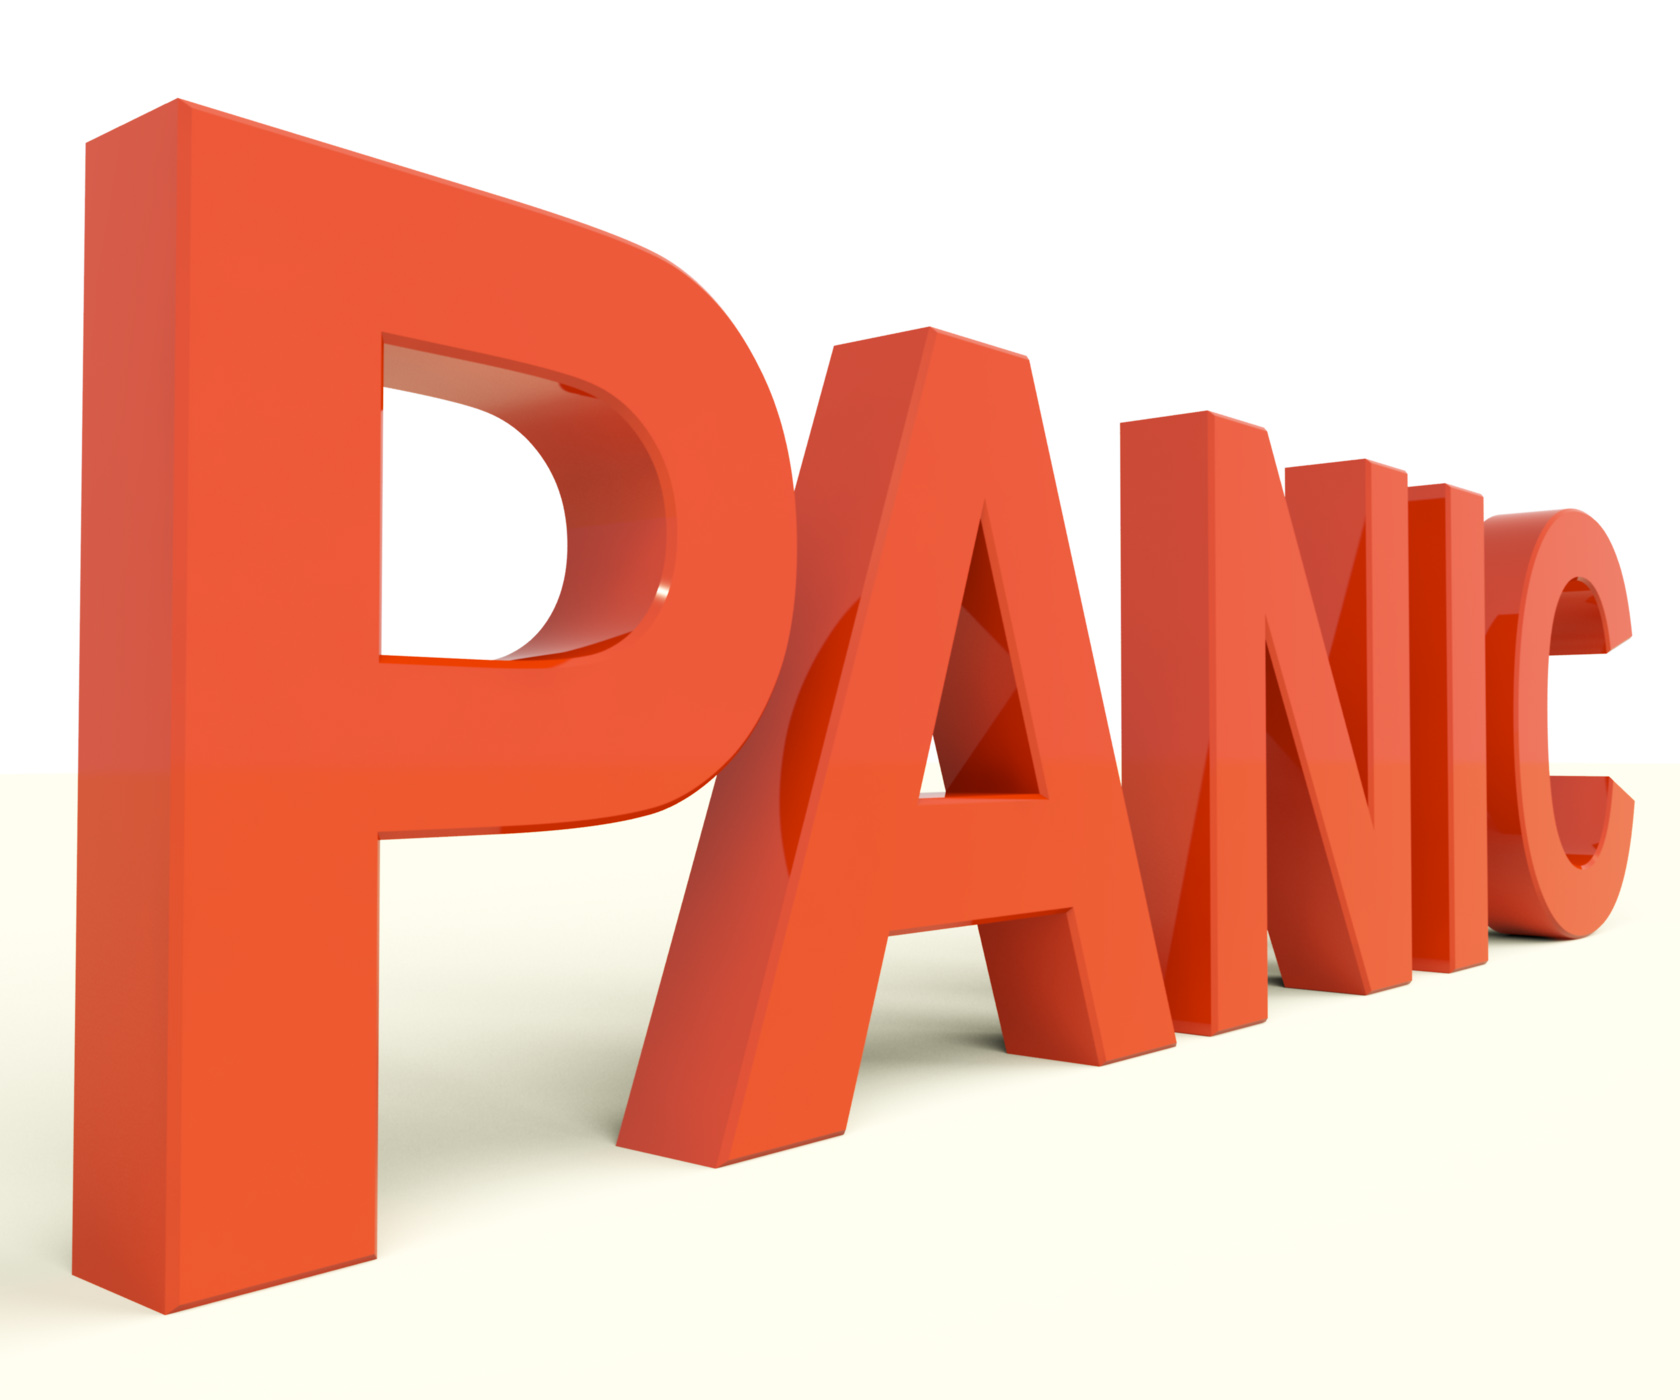 Panic word as symbol for emergency and stress photo